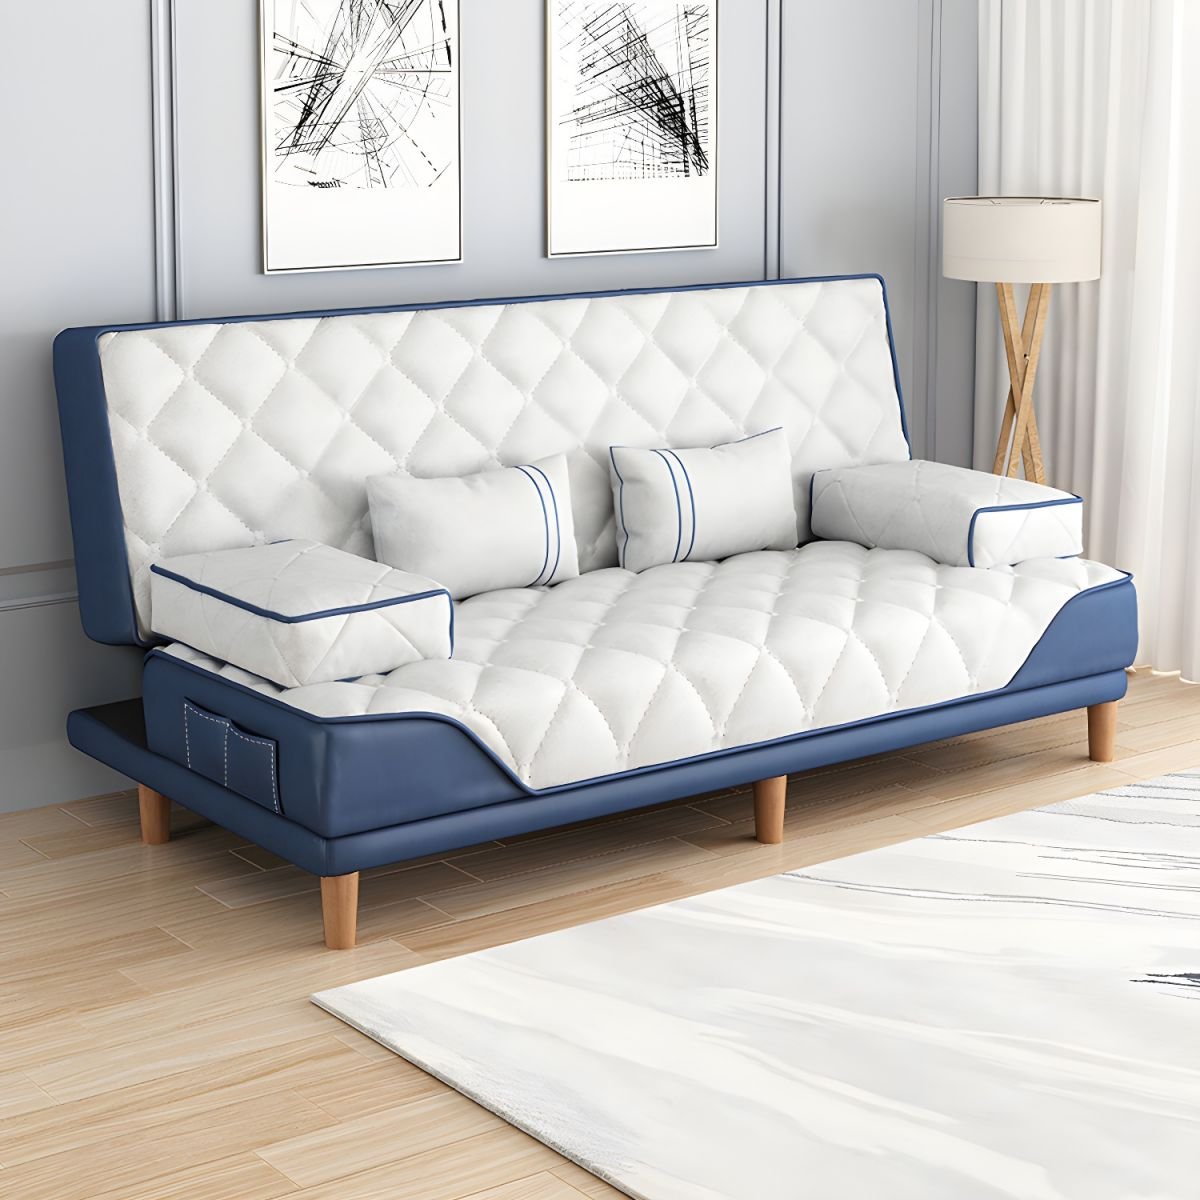 Contemporary Tight Back Convertible Sofa and Chaise with Pillow Top Arm - 47"L x 30"W x 34"H Dark Blue/ White Tech Cloth